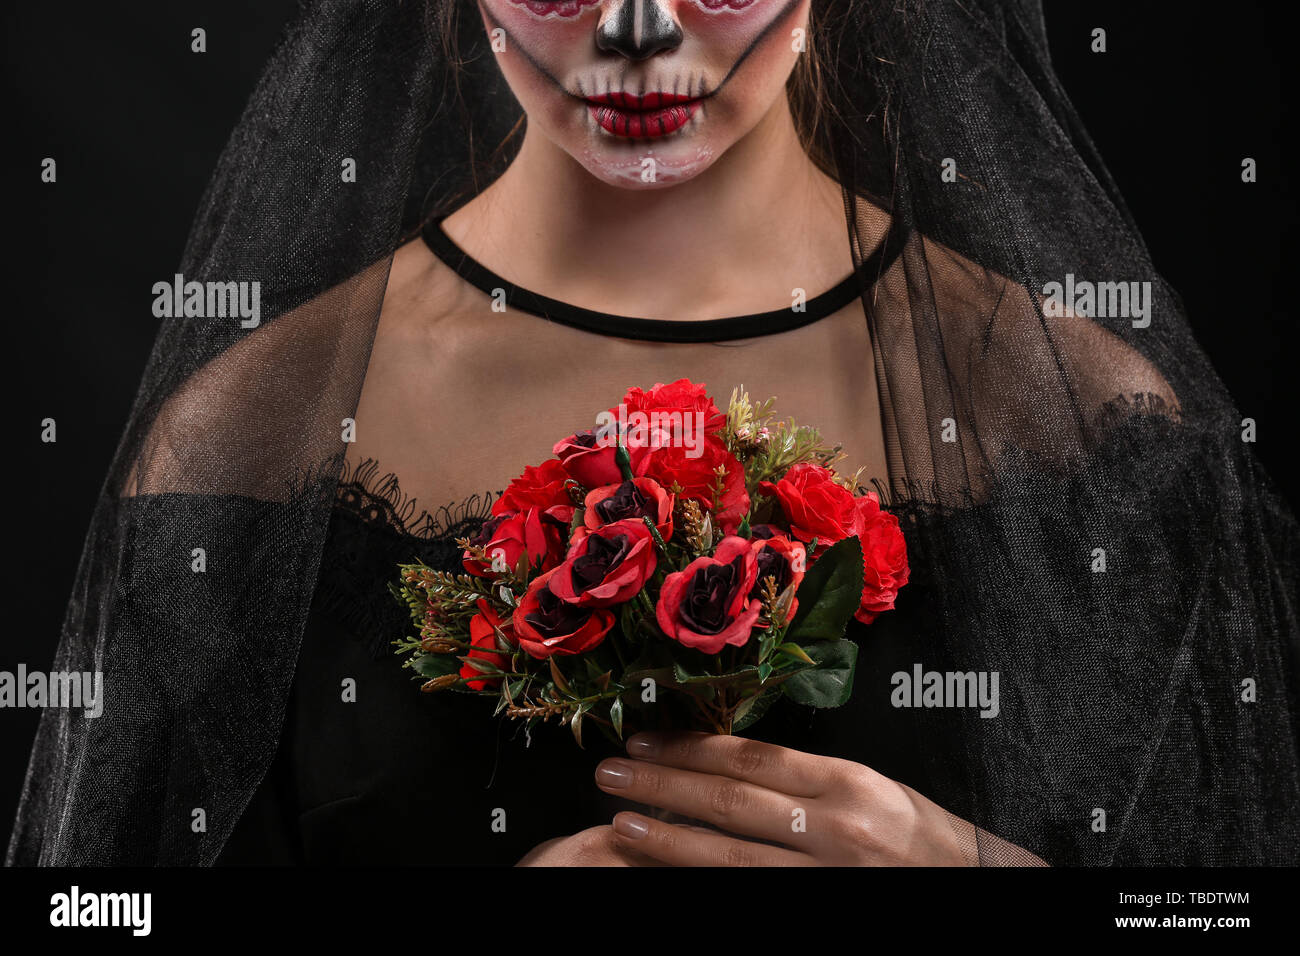 Young woman with painted skull on her face for Mexico's Day of the Dead and flowers against dark background Stock Photo